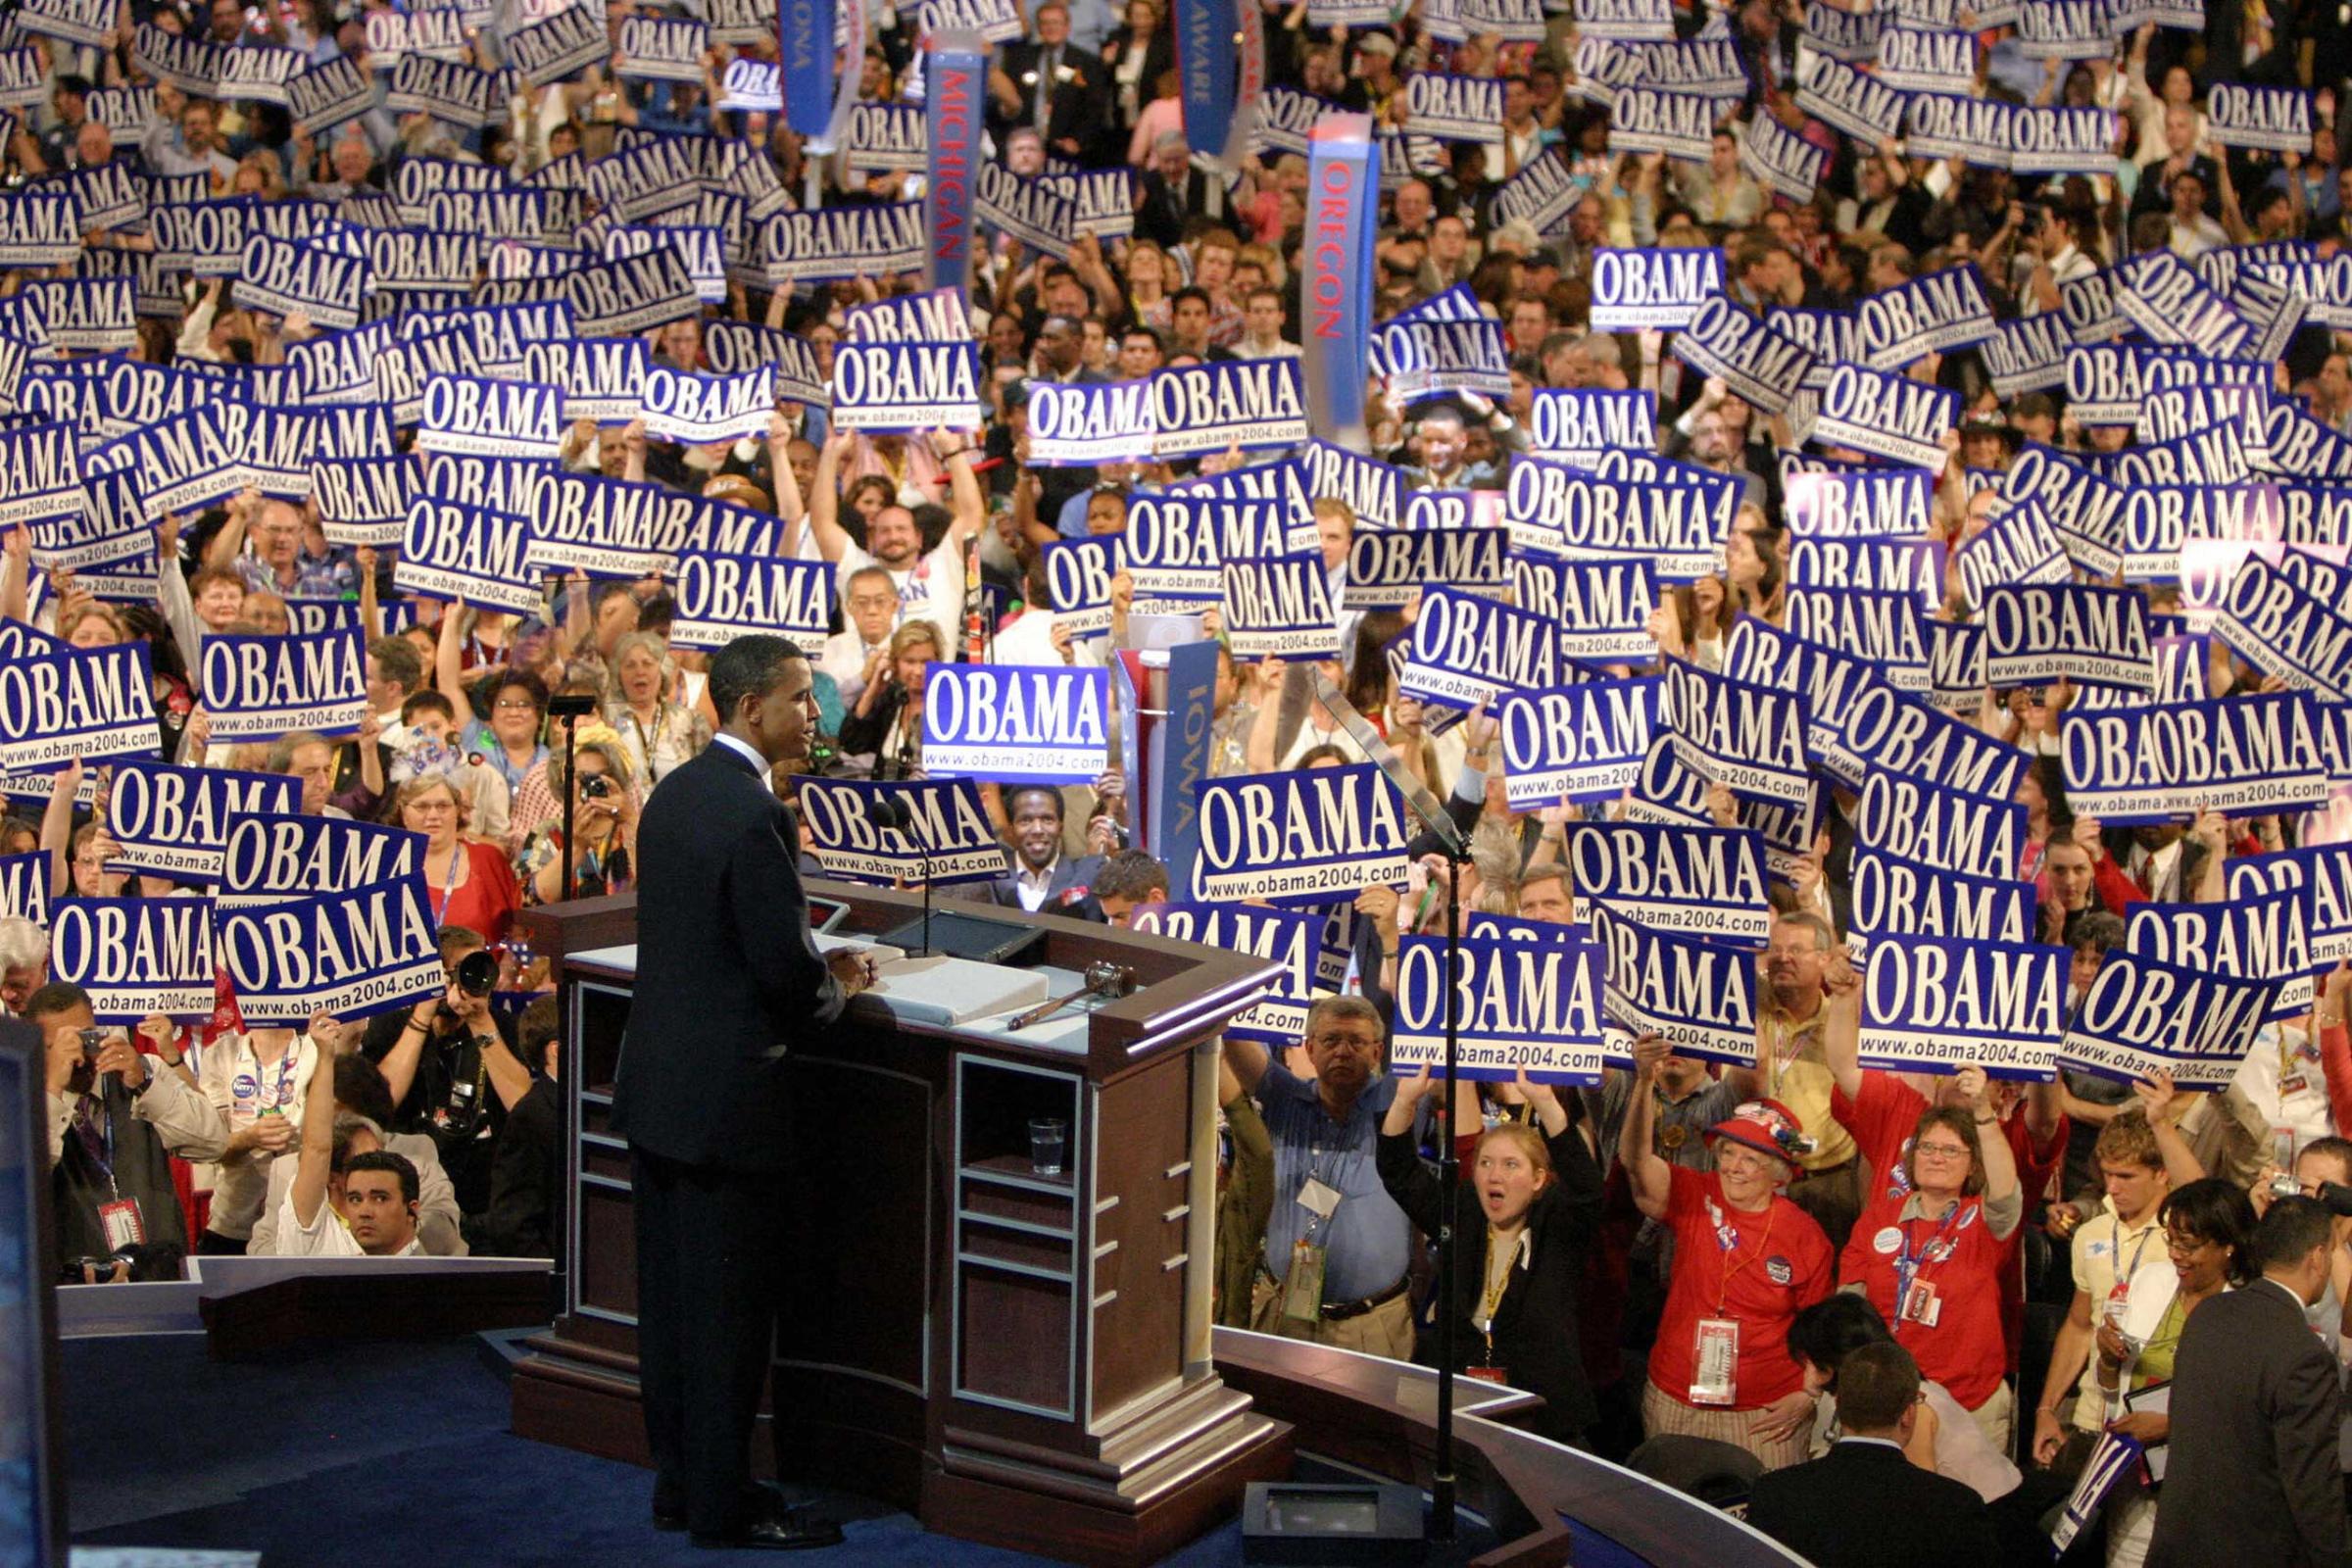 Barack Obama, US Senate candidate for Illinois, is greeted by delegates at the Democratic National Convention in Boston on July, 2004.